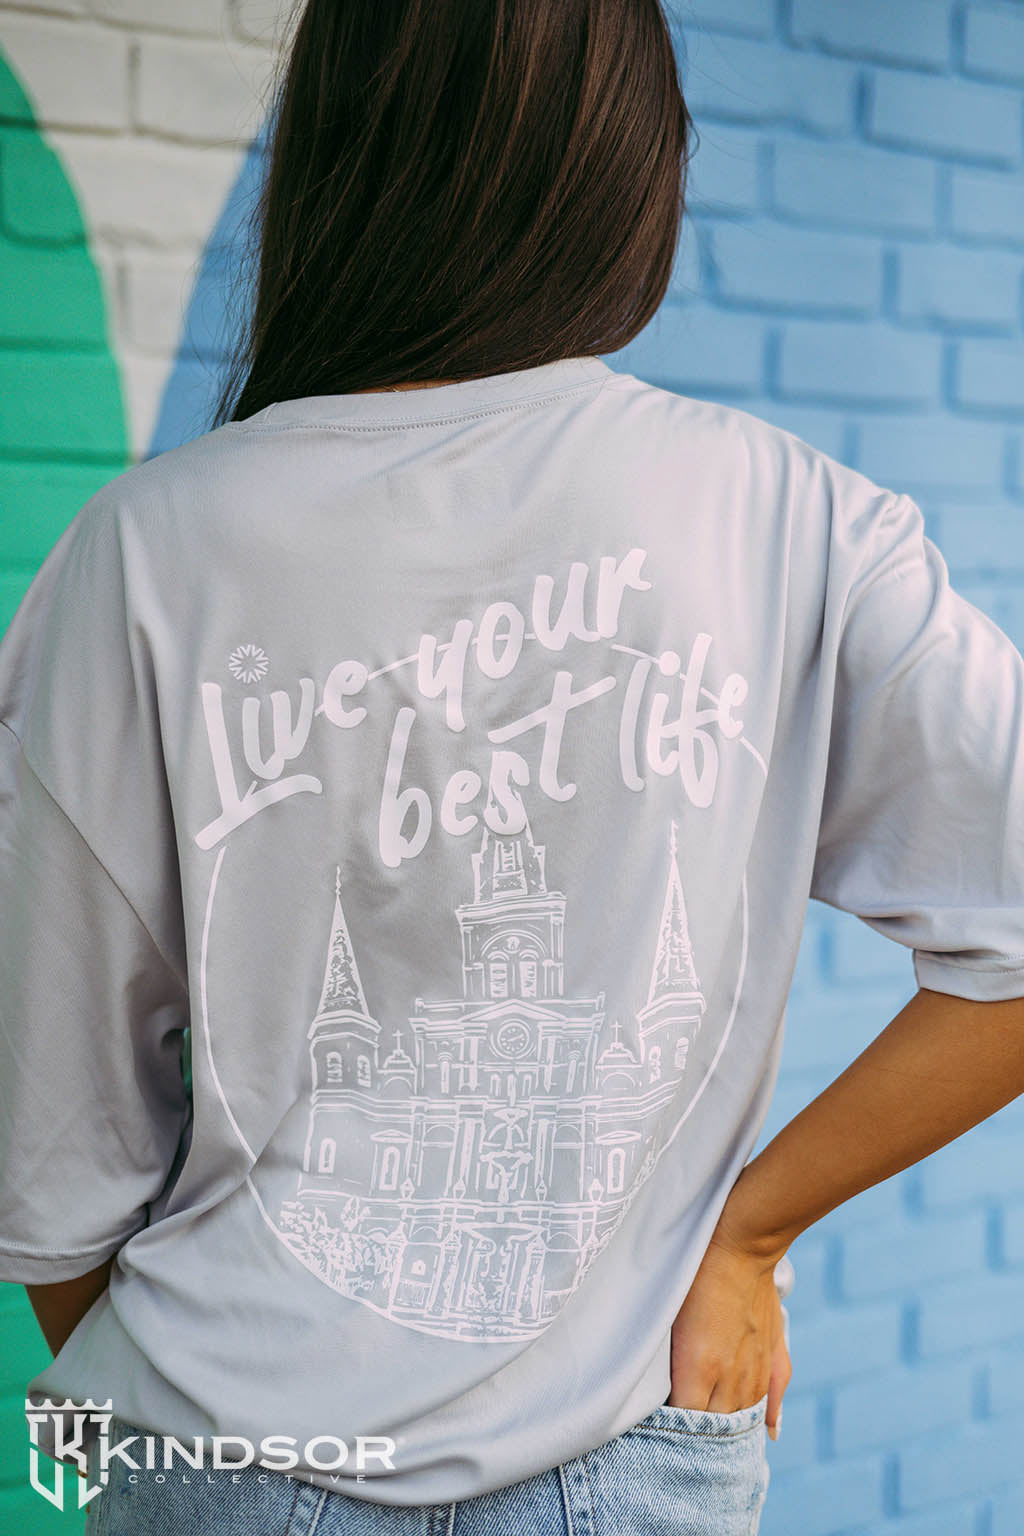 Privateer Place Live Your Best Life Tshirt